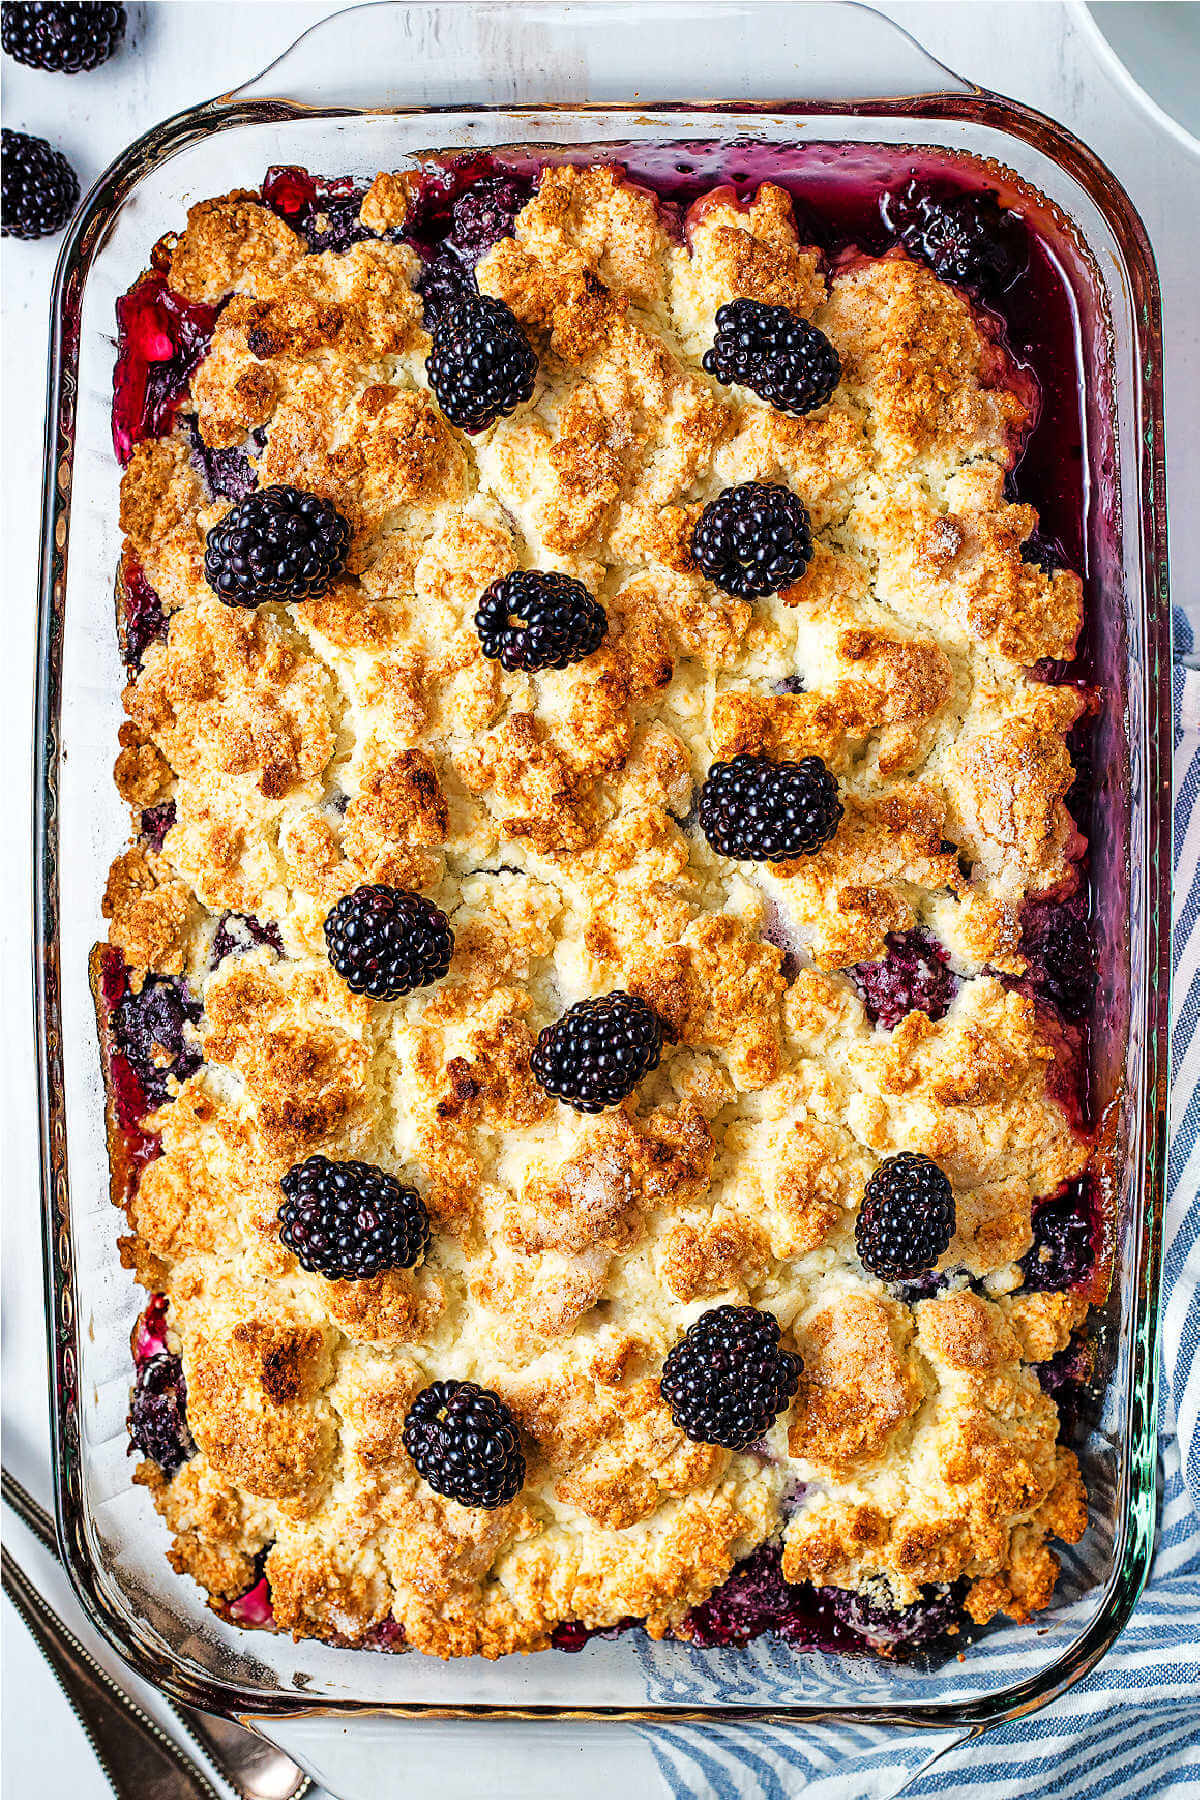 A freshly baked blackberry cobblre in a glass dish with blackberries scattered on top.